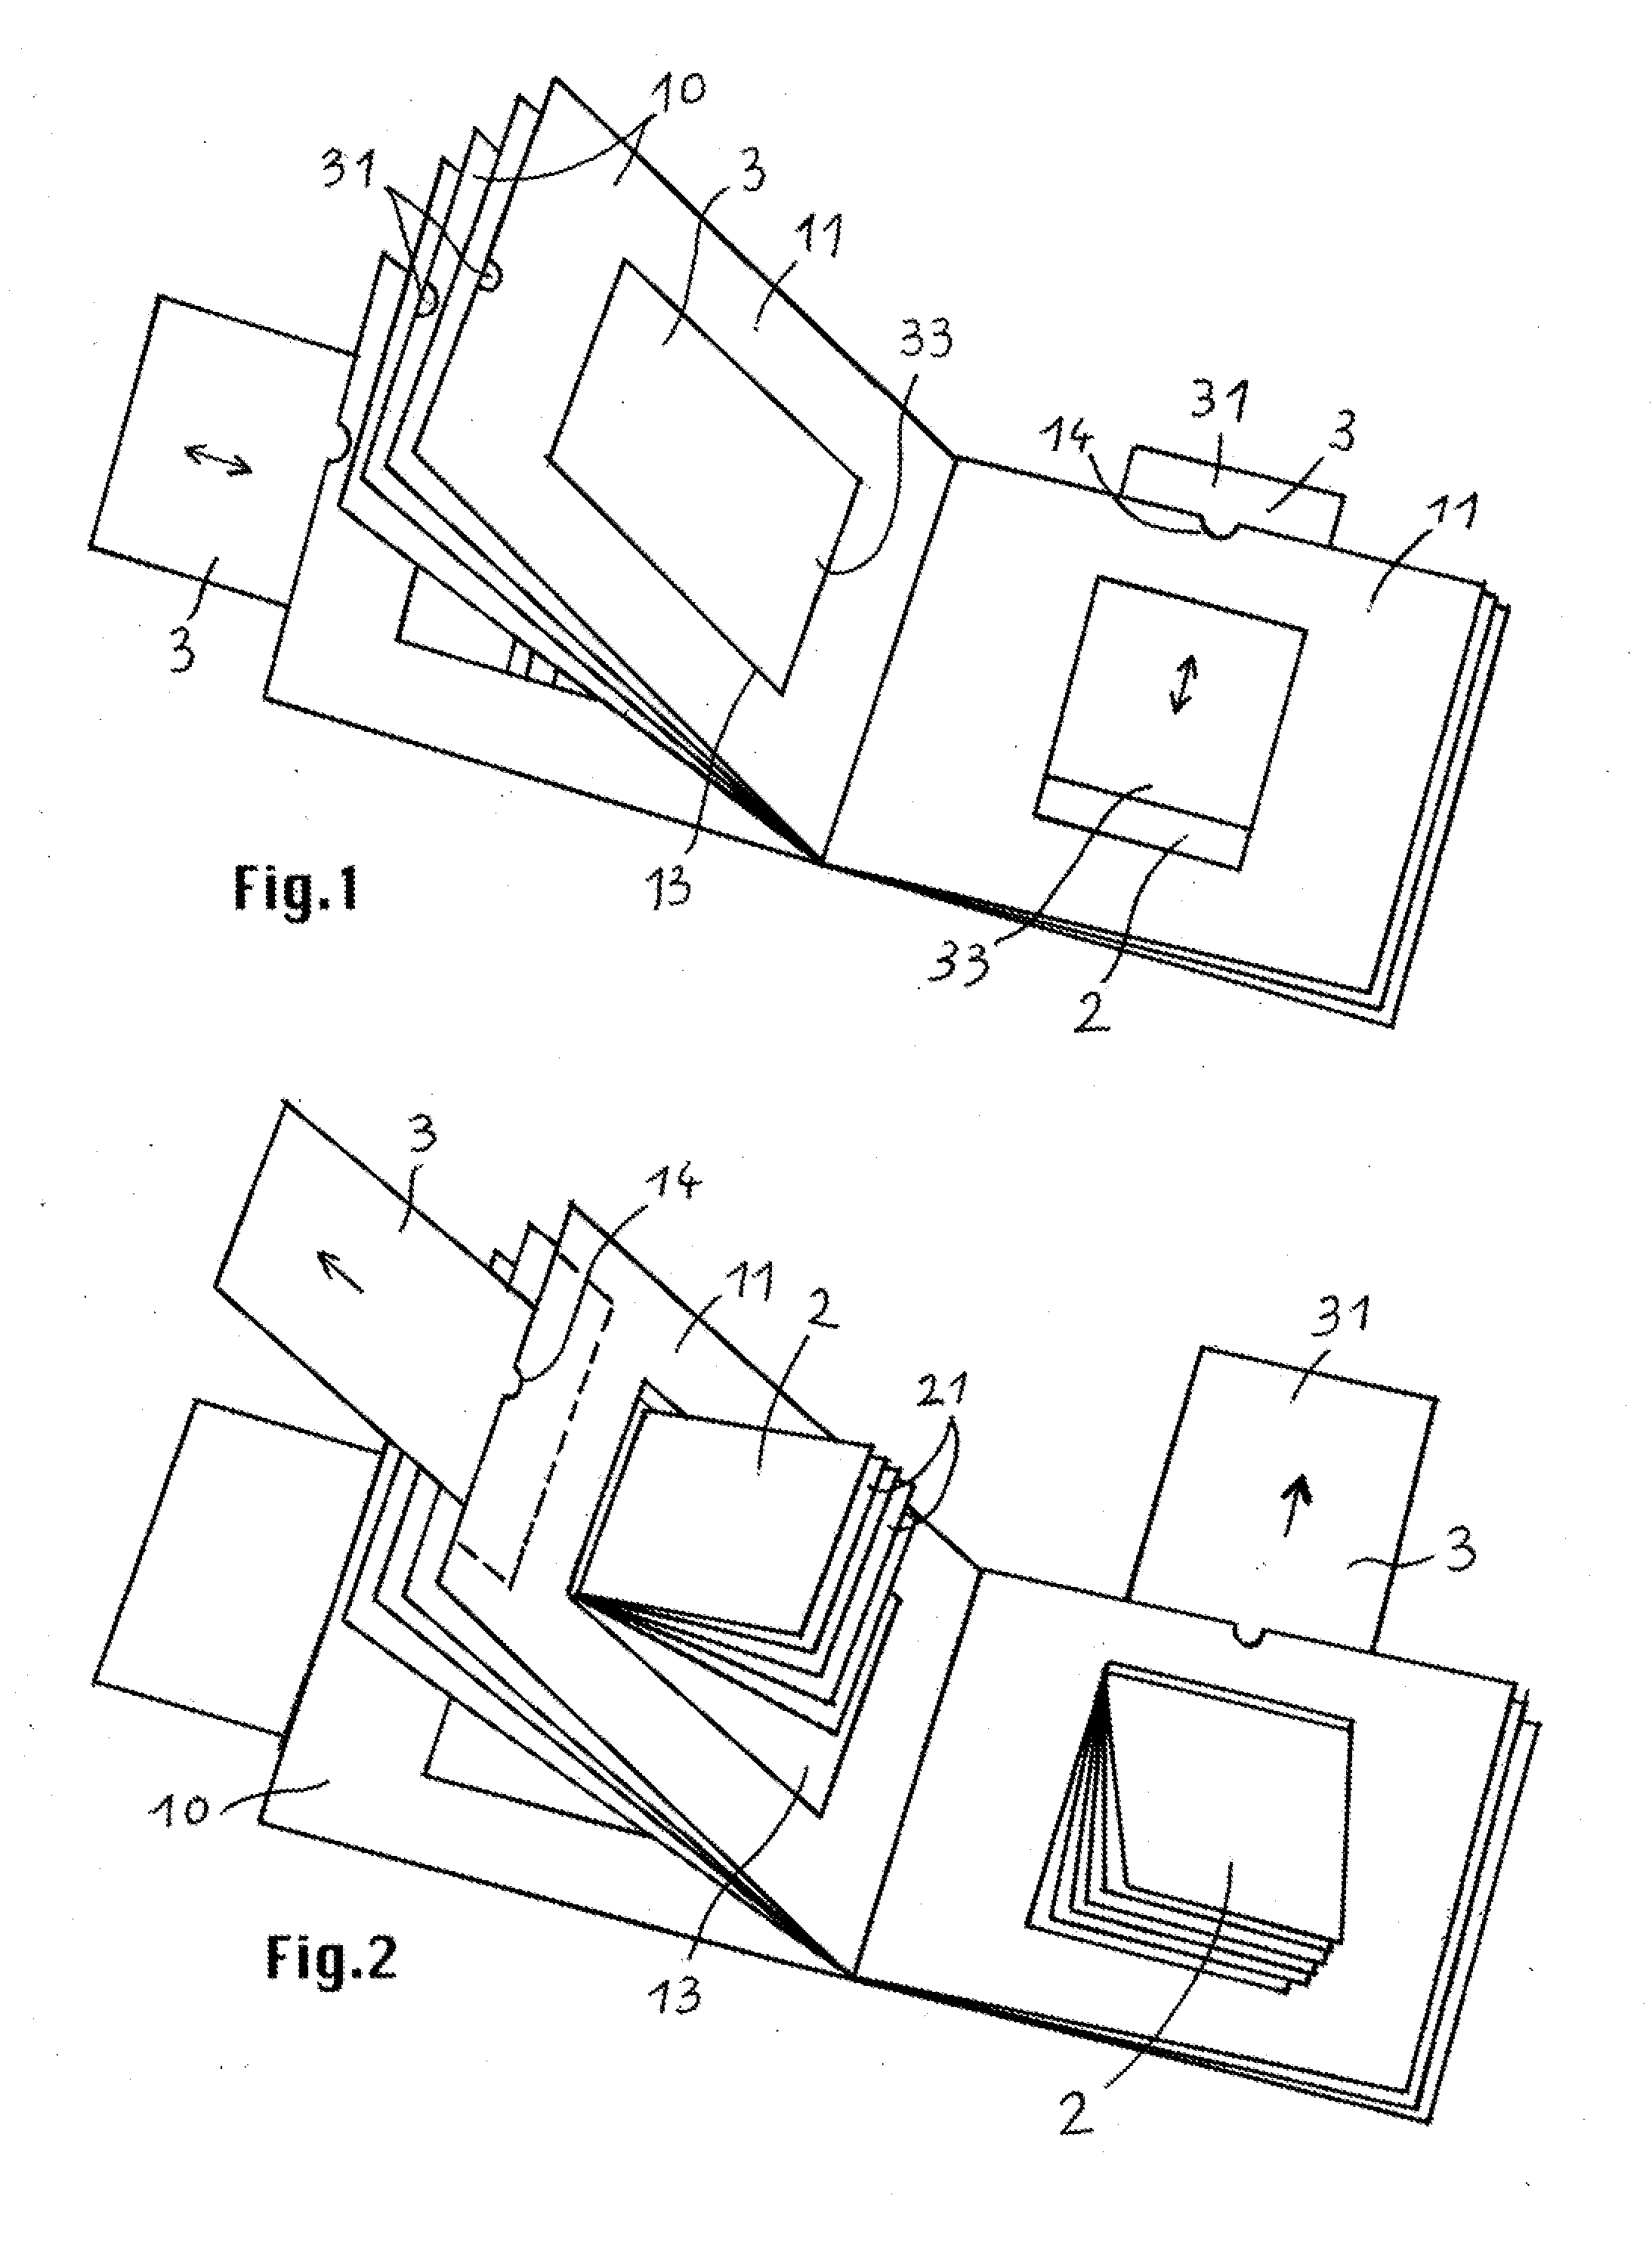 Panel Comprising at Least One Display Window, and Various Uses of Such a Panel